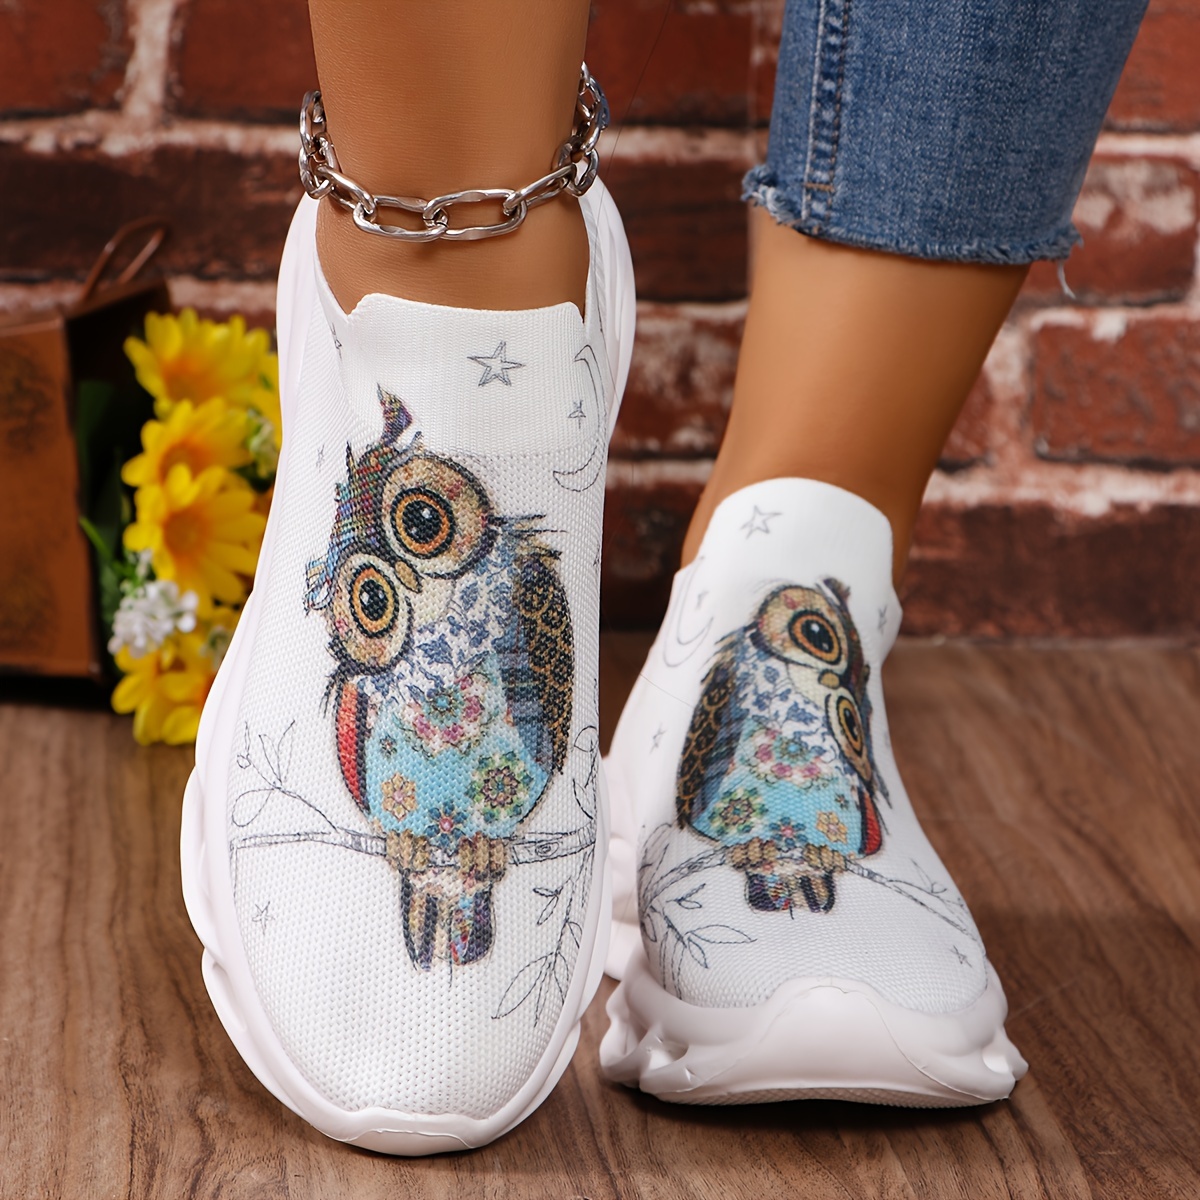 

Women's Fashion Slip-on Sneakers, Casual Owl Print Sport Shoes, Lightweight Breathable Mesh Walking Shoes, Stylish White Footwear With Durable Sole